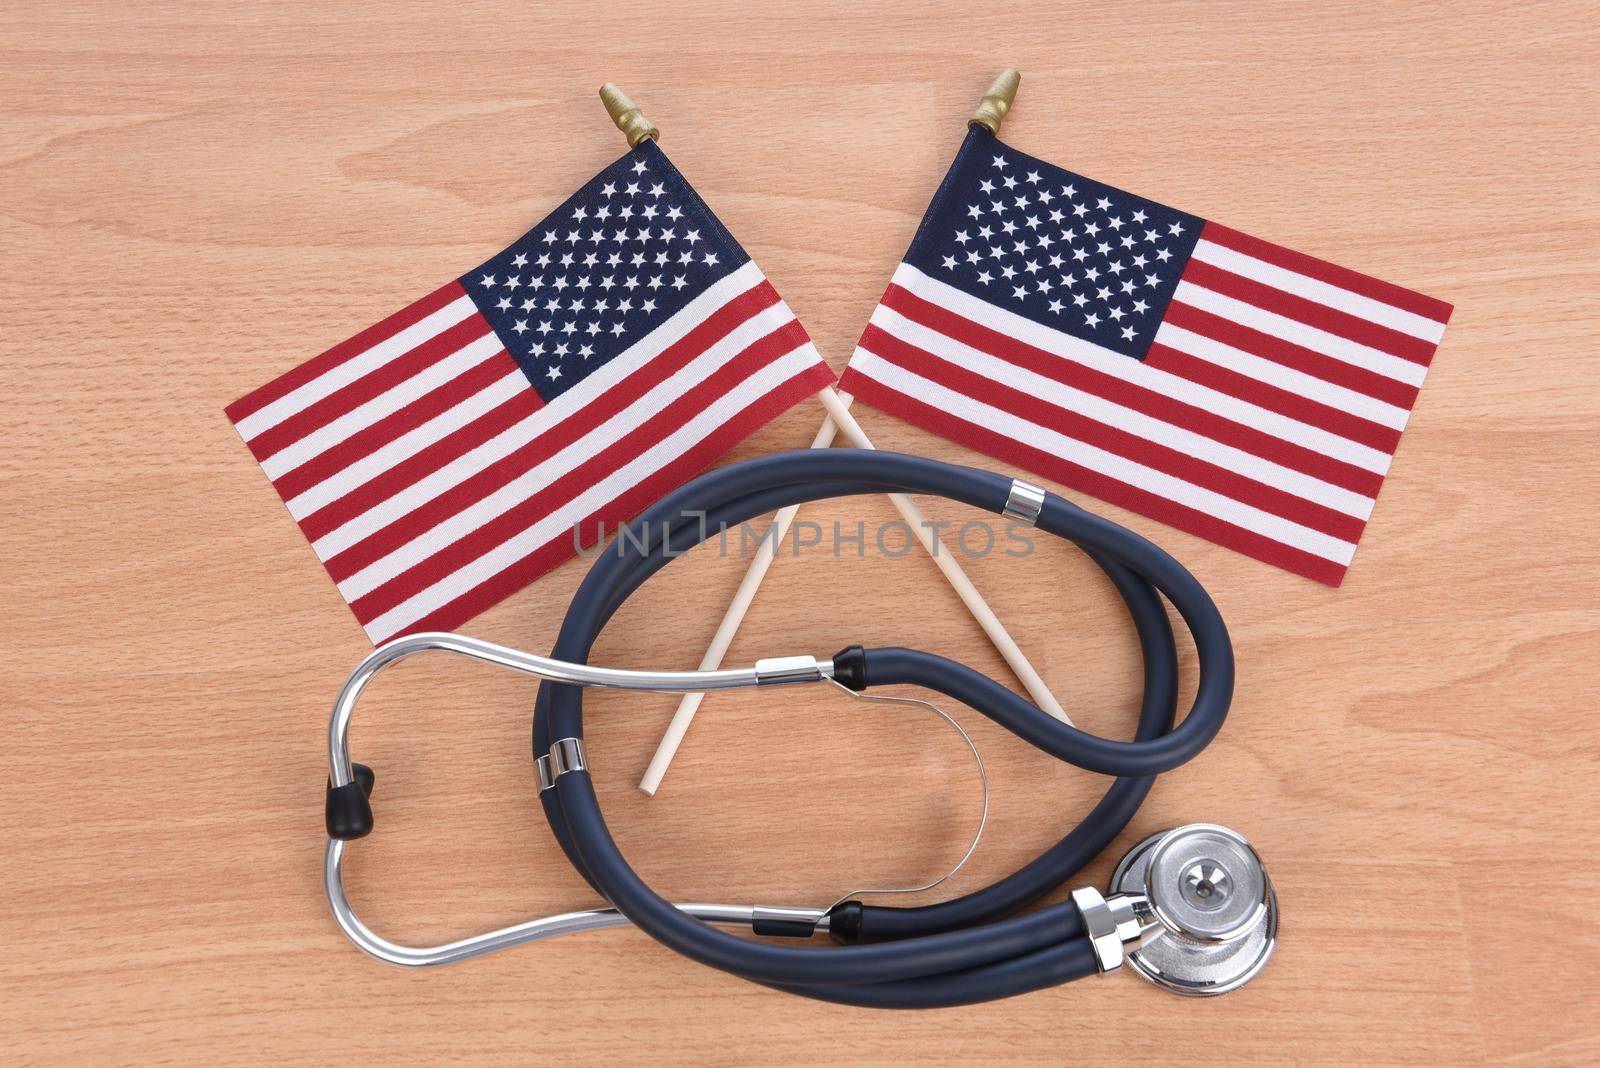 Military Health Care Concept. Light wood background with stethoscope and two crossed American flags.